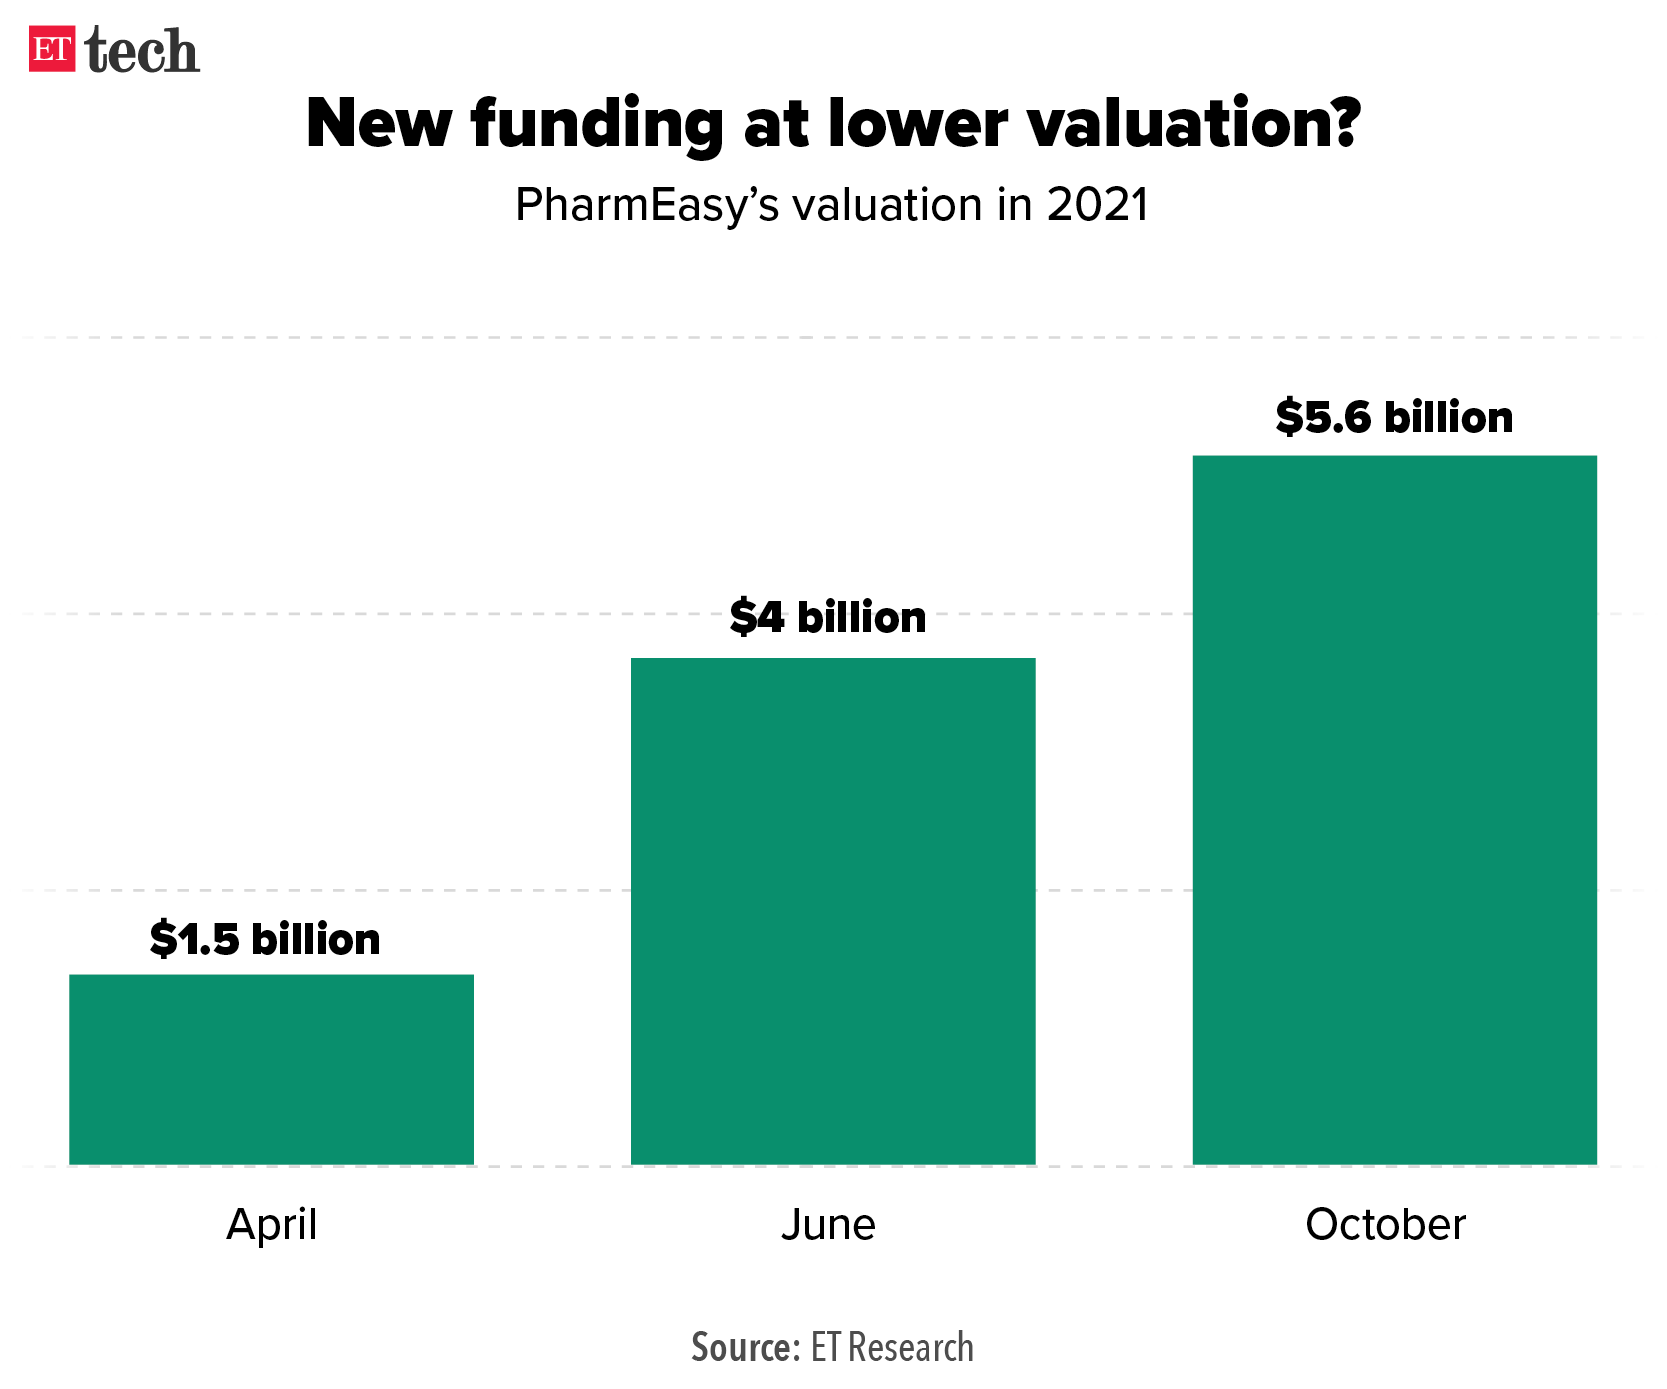 New funding at lower valuation